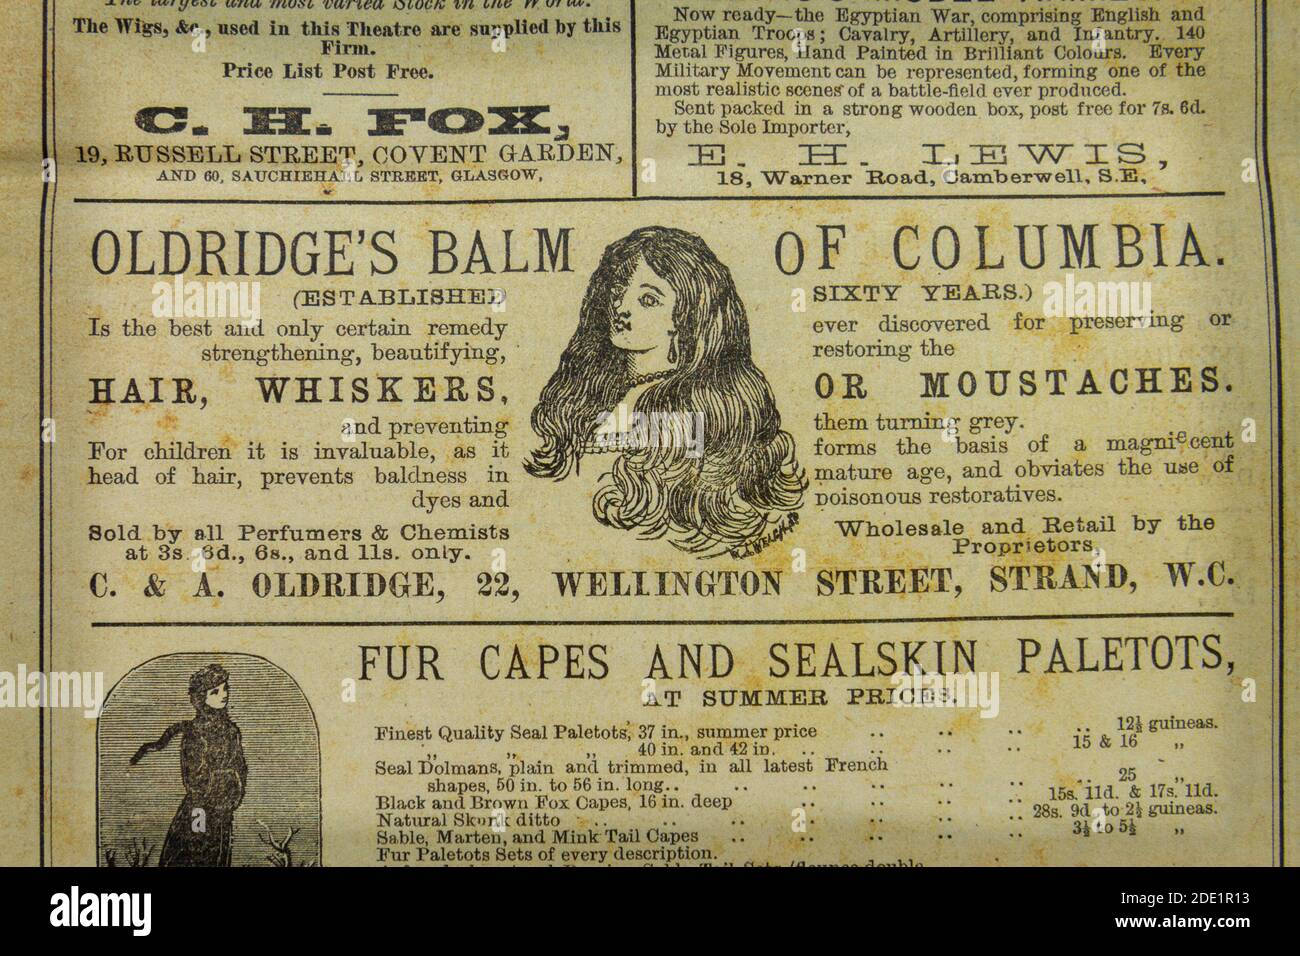 Advert for Oldridge's Balm of Columbia in the Gaiety Theatre programme (replica), 22nd October 1883. Stock Photo